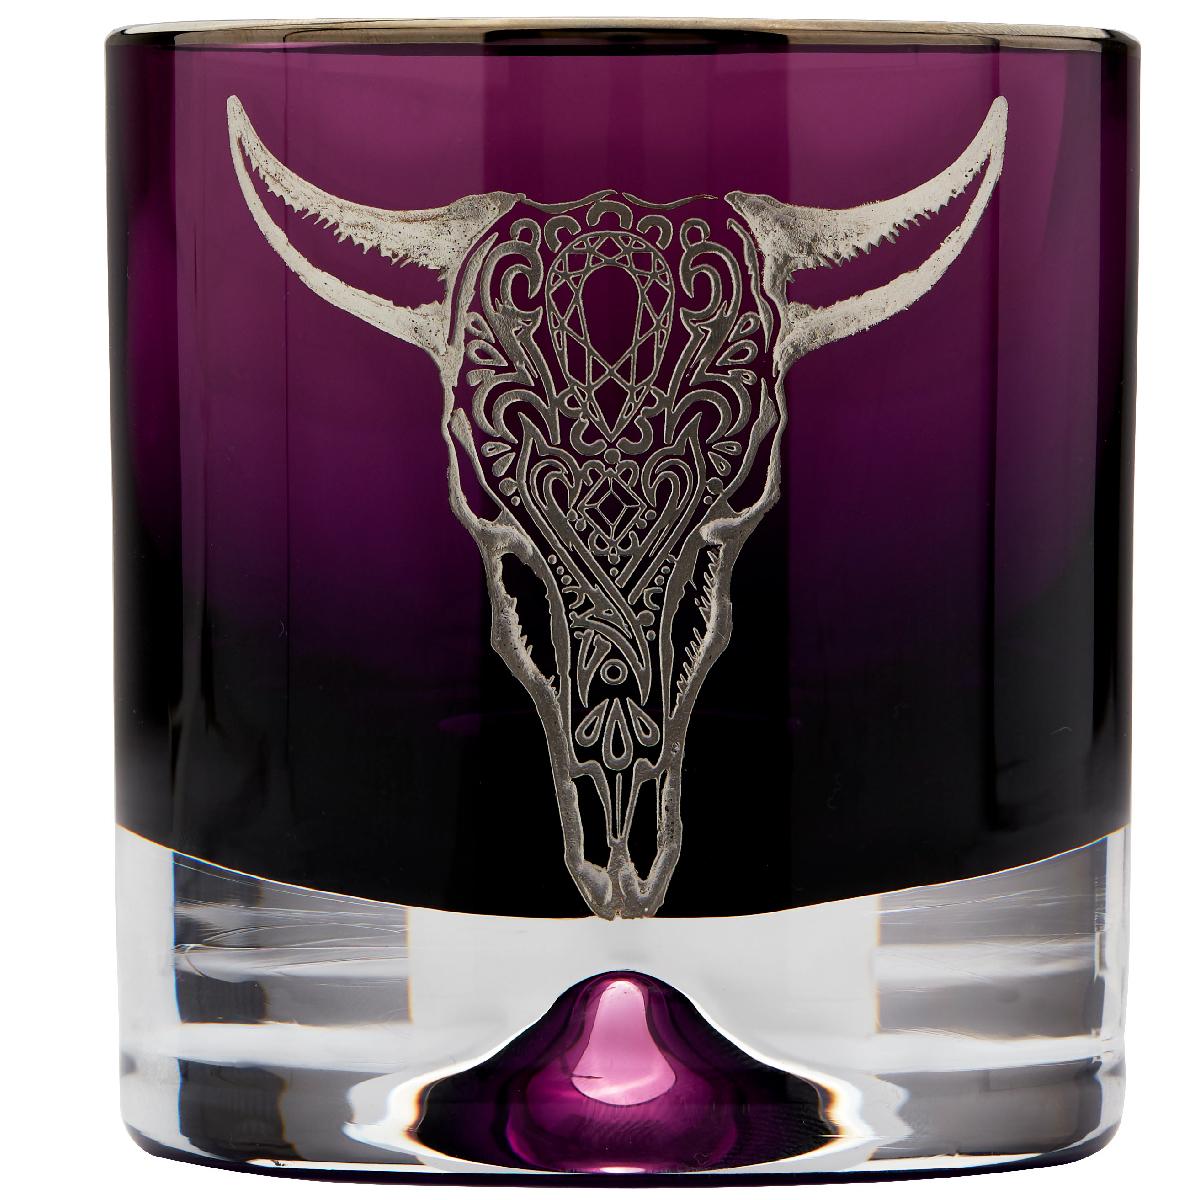 ‘Tequila Lore’ is a set of bold and eye-catching bar accessories that celebrates Mexico’s culture, folklore and famous tipple—tequila.

Lead crystal shot glasses and tumblers in either smoke or amethyst-coloured glass, handmade in the UK, also